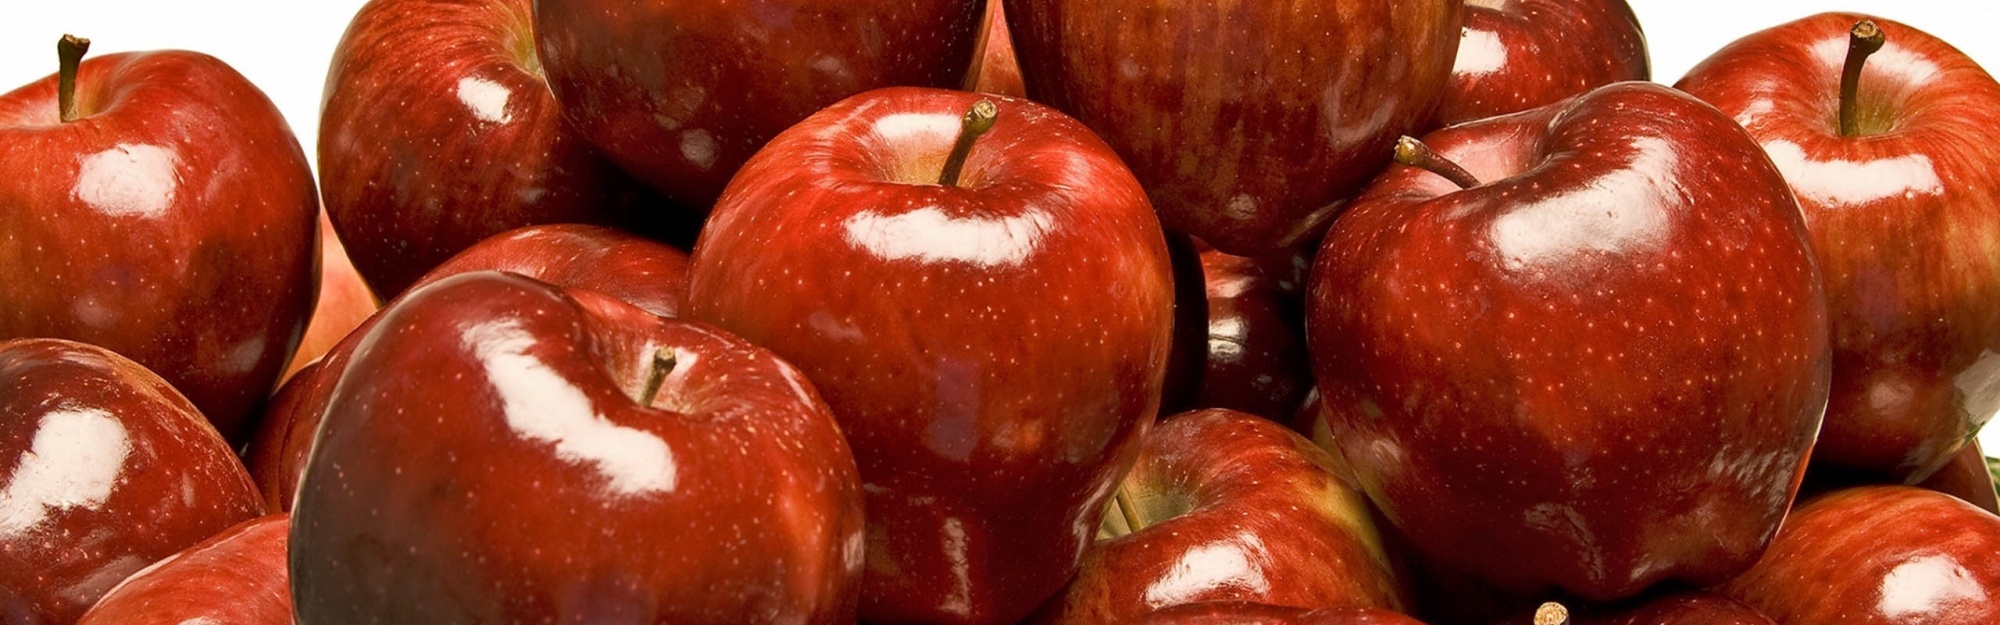 Shiny Red Apples